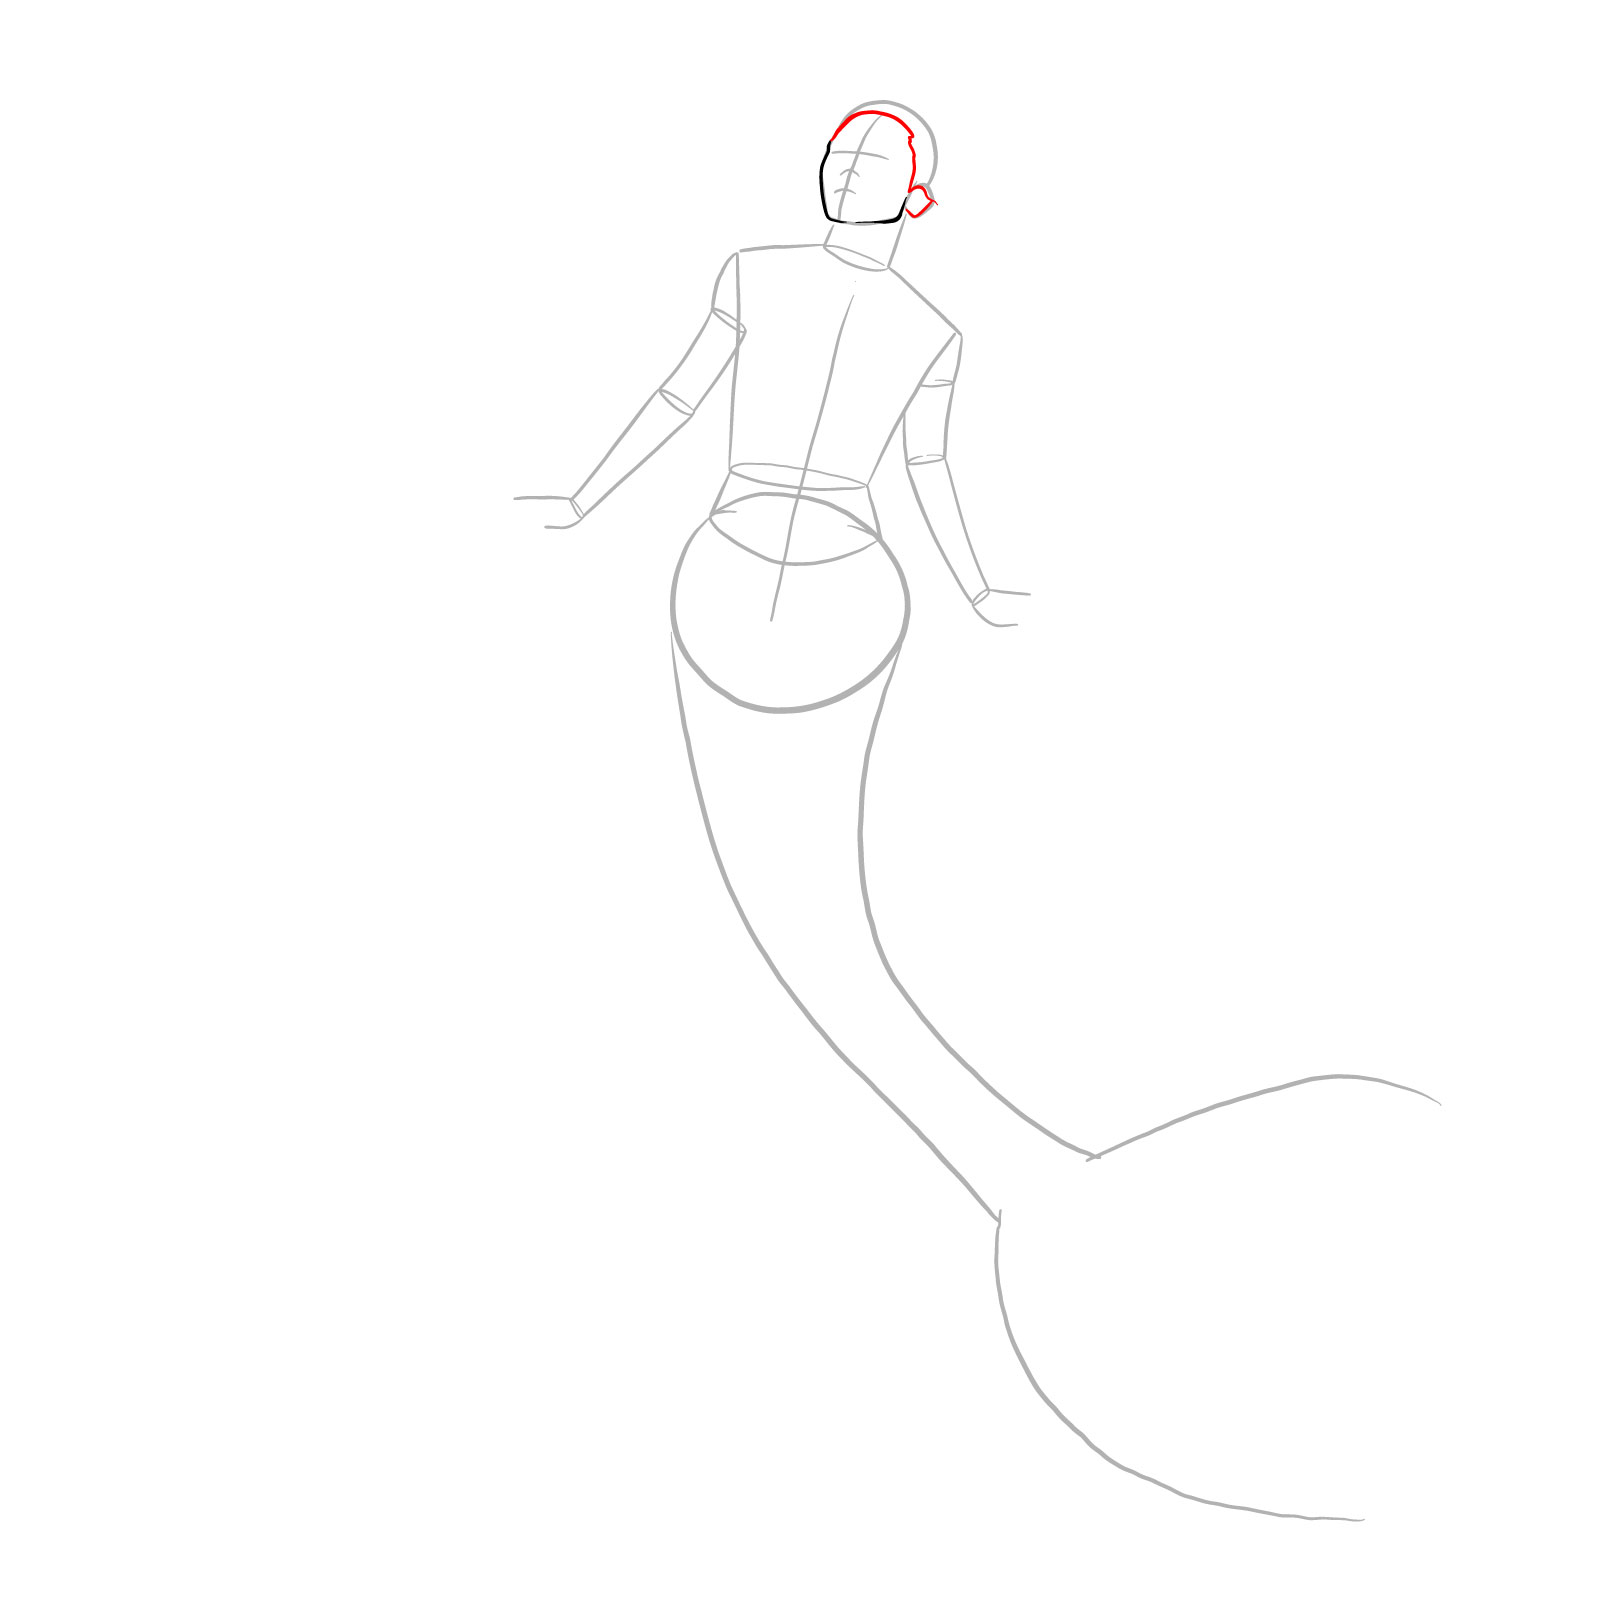 How to draw a Mermaid - step 05